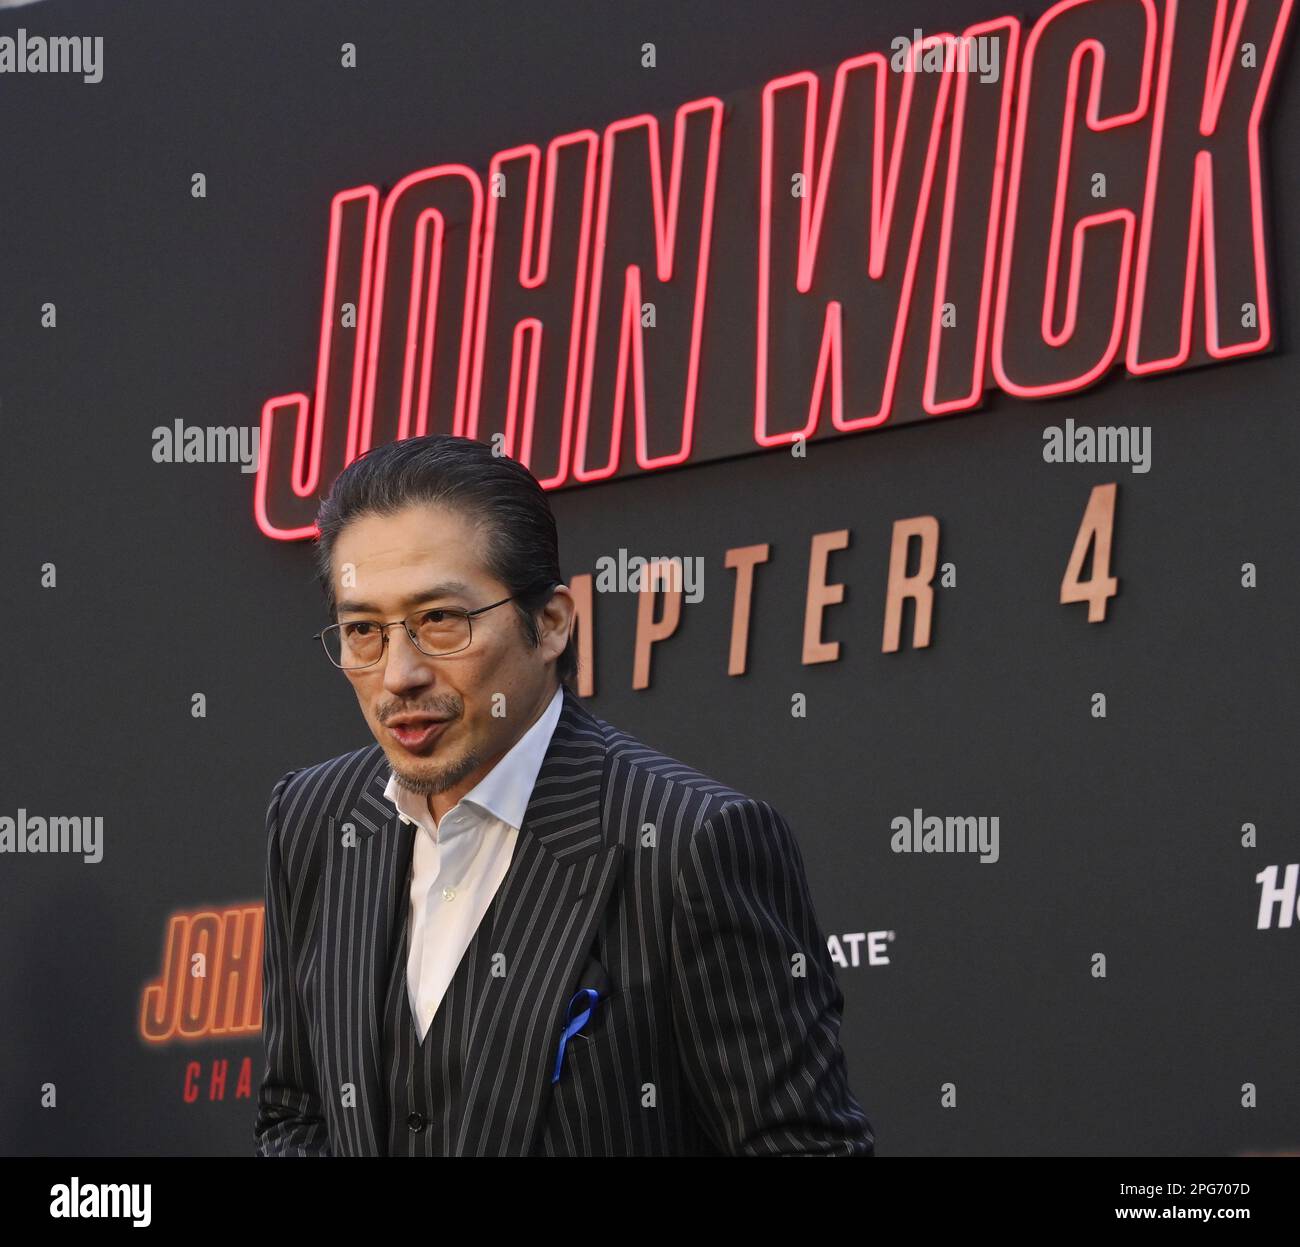 Los Angeles, United States. 20th Mar, 2023. Cast member Hiroyuki Sanada attends the premiere of the motion picture crime thriller 'John Wick: Chapter 4' at the TC: Theatre in the Hollywood section of Los Angeles on Monday, March 20, 2023. Storyline: John Wick uncovers a path to defeating The High Table. But before he can earn his freedom, Wick must face off against a new enemy with powerful alliances across the globe and forces that turn old friends into foes. Photo by Jim Ruymen/UPI Credit: UPI/Alamy Live News Stock Photo